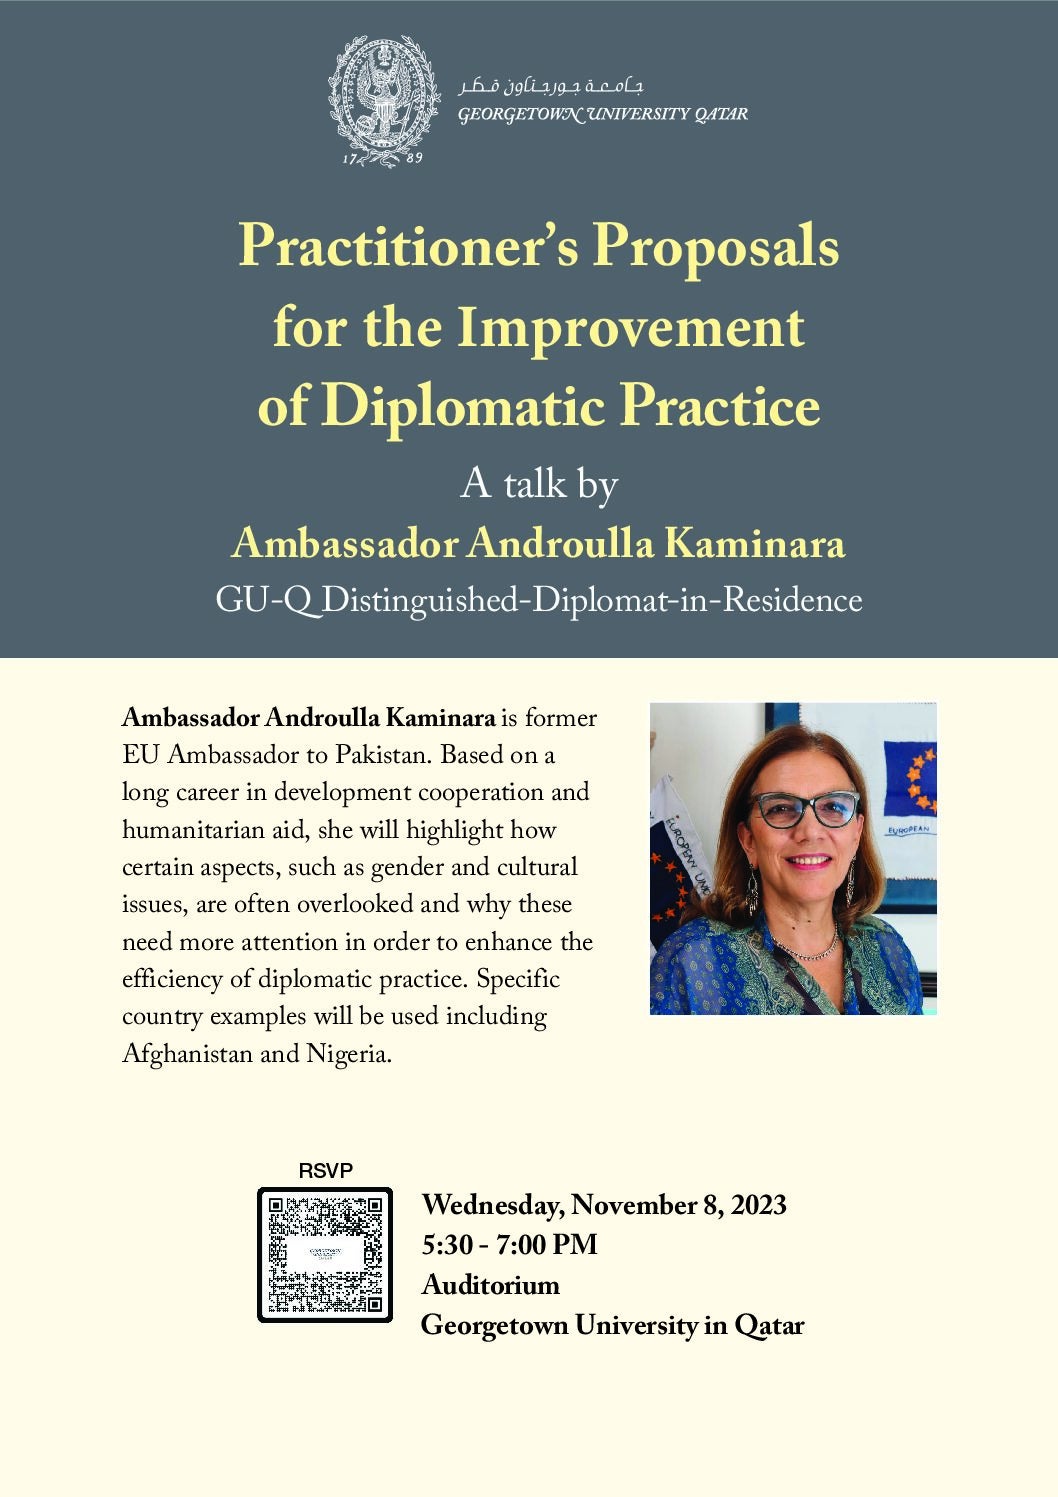 Practitioner's Proposals on How to Enhance Diplomatic Practice_Final v3 (2)